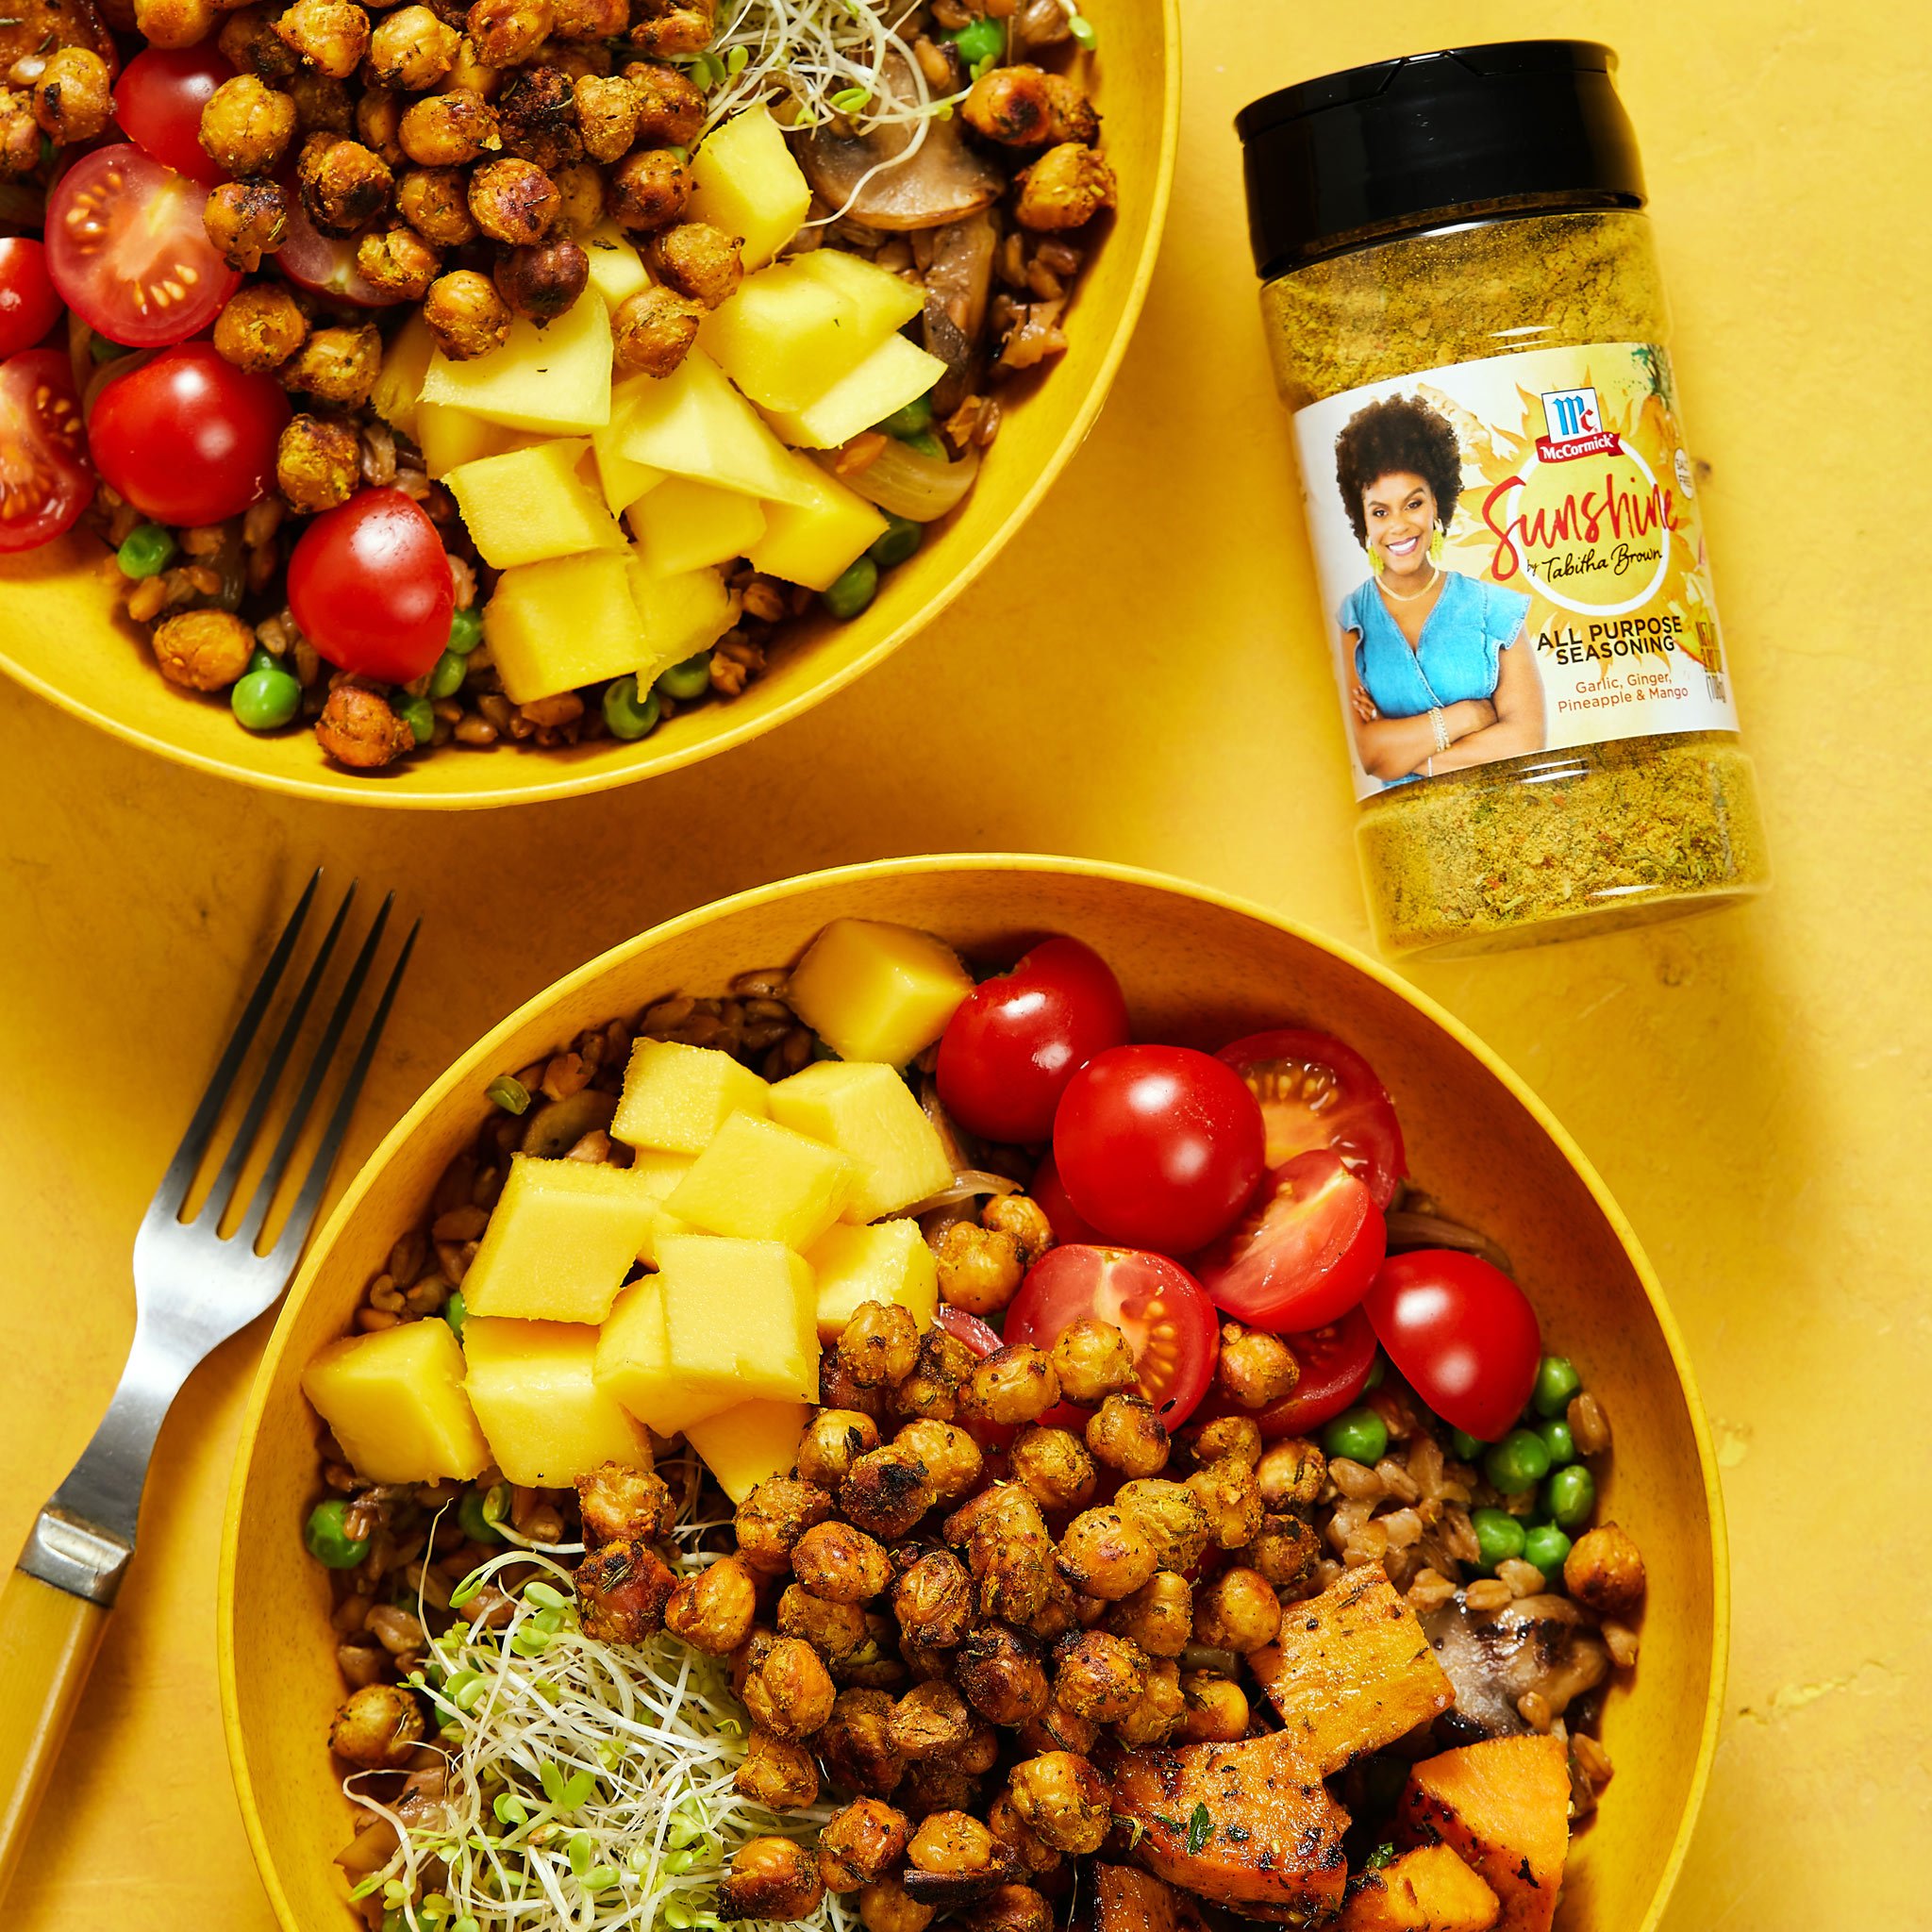 Tabitha Brown's 'Sunshine All Purpose Seasoning' Sells Out In 39 Minutes!